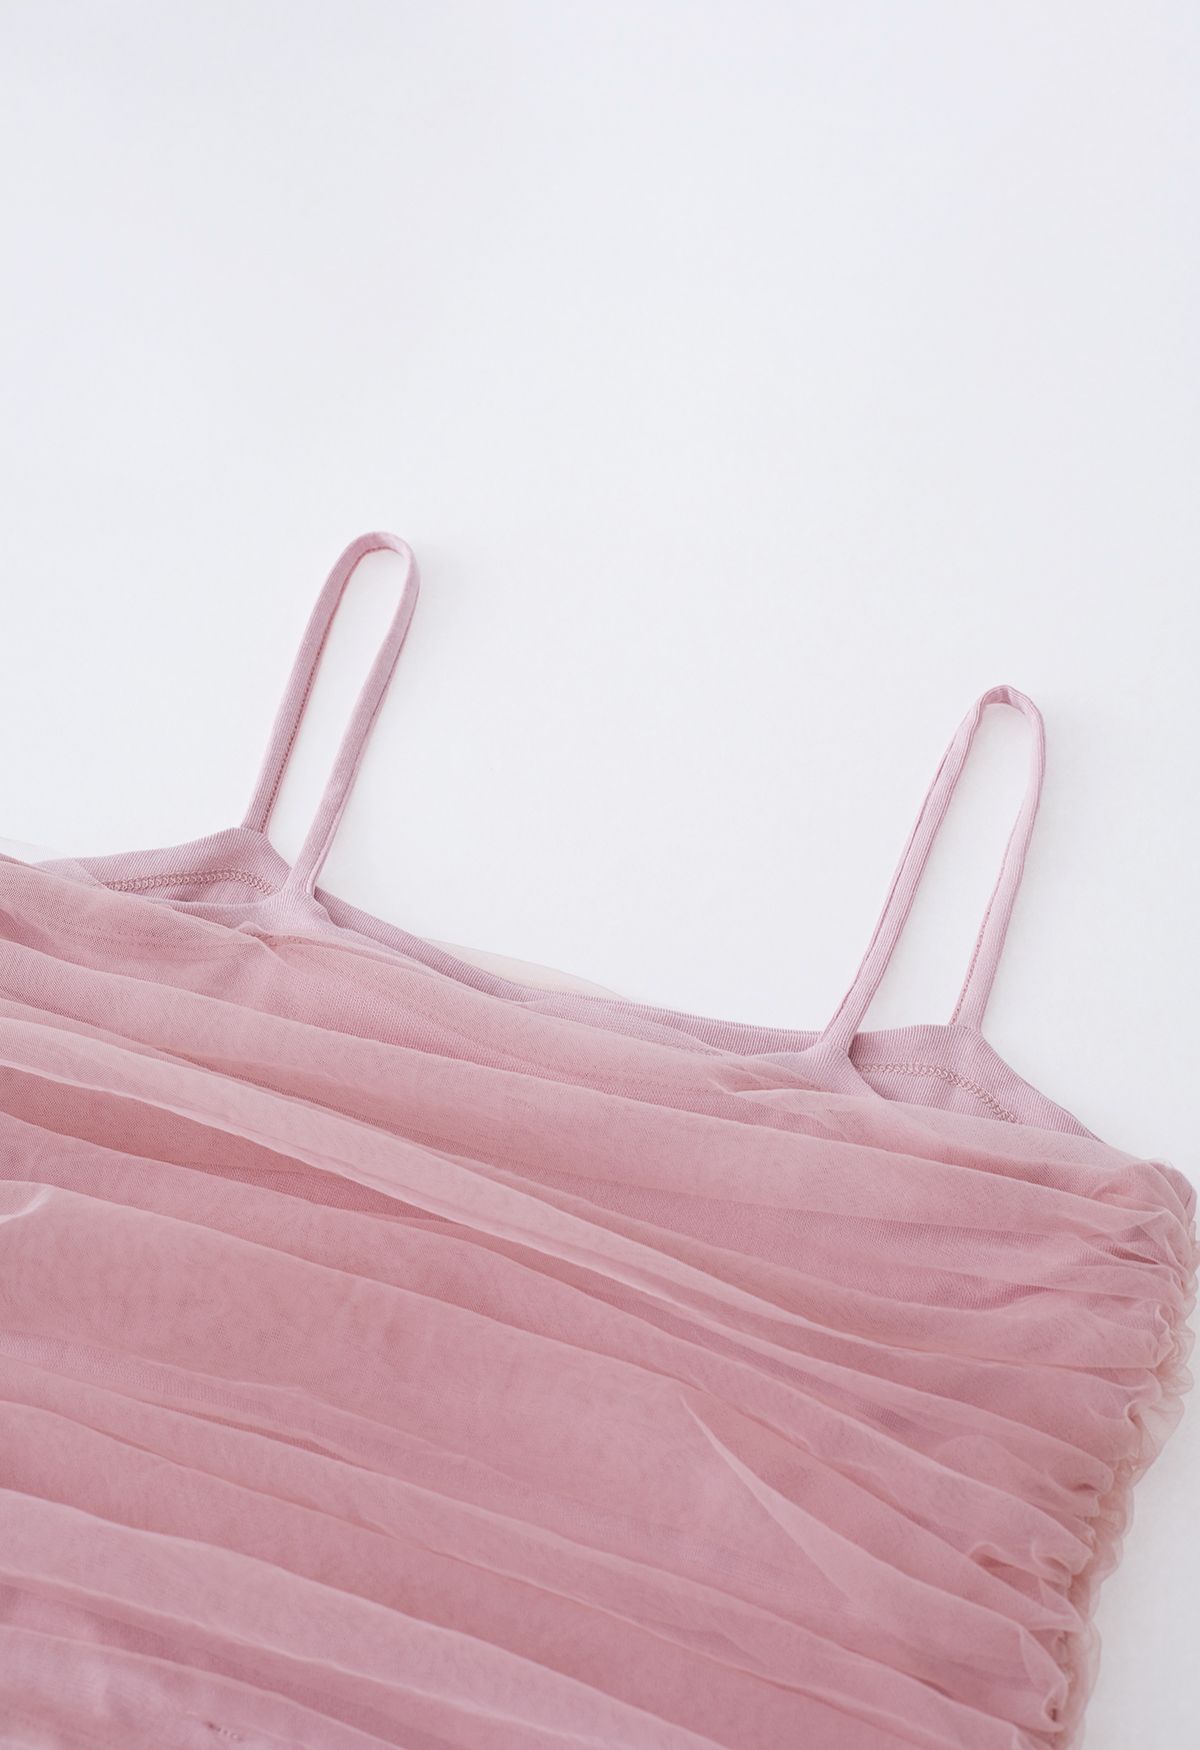 Ruched Mesh Cami Top in Pink